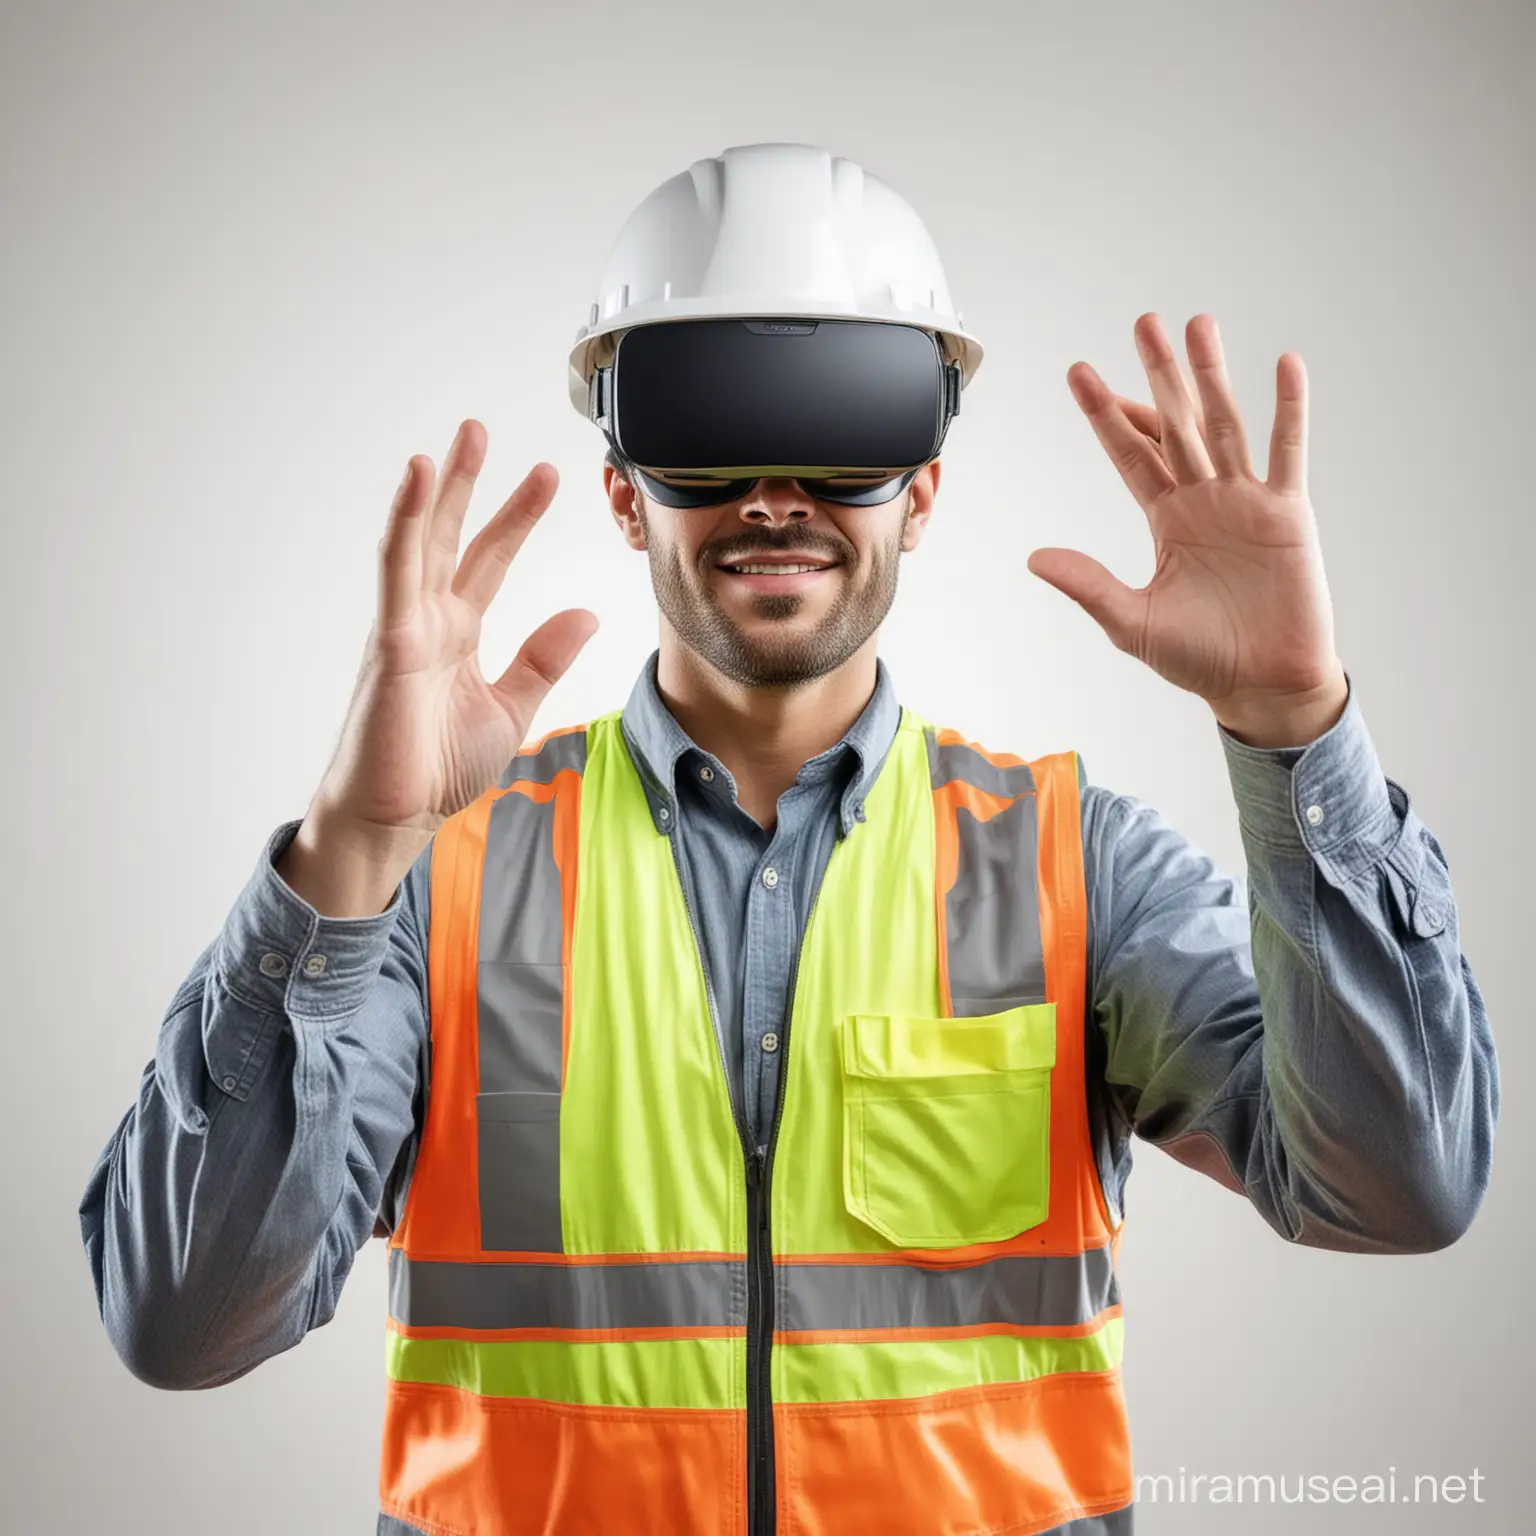 Virtual Reality Construction Worker Giving Thumbs Up